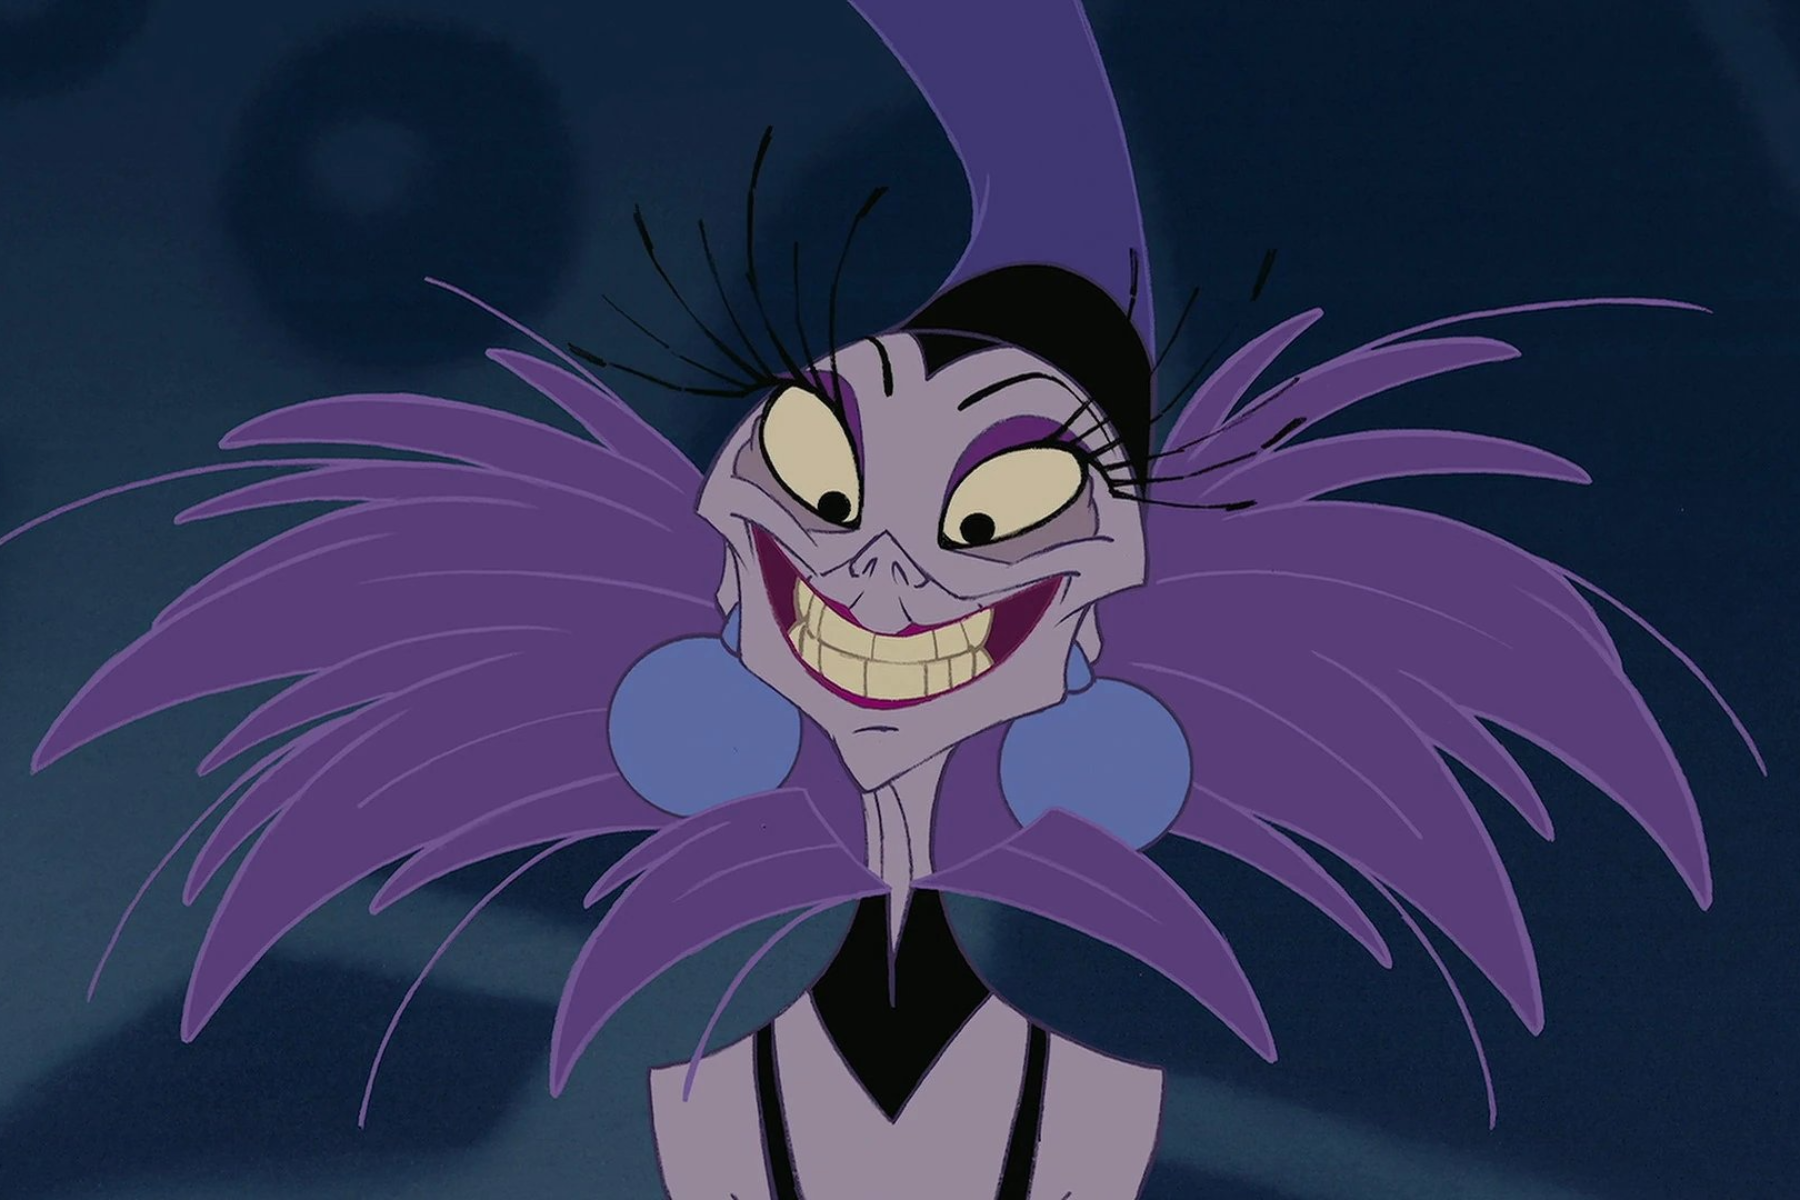 Yzma smiles against a blurred background